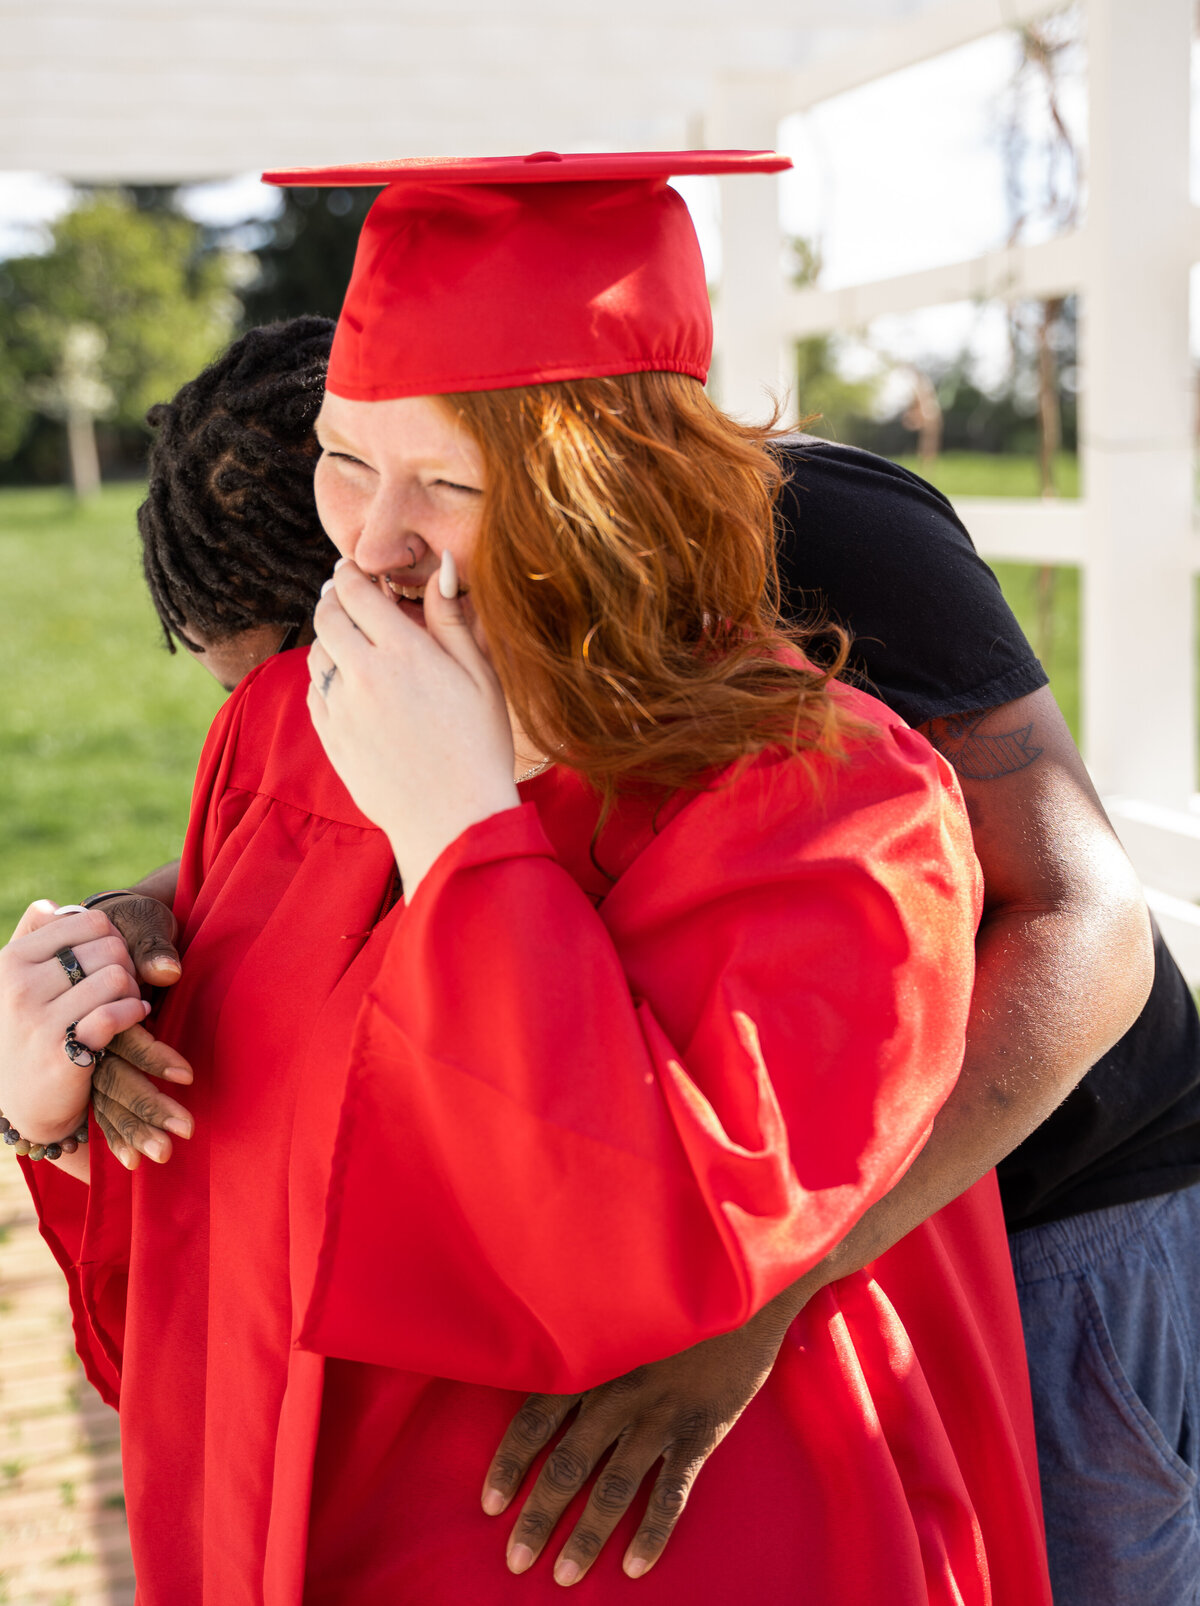 Groveport senior, Natalie Morgan, laughs in her red cap and gown with her boyfriend at the Slate Run Living Historical Farm in Canal Winchester, Ohio.